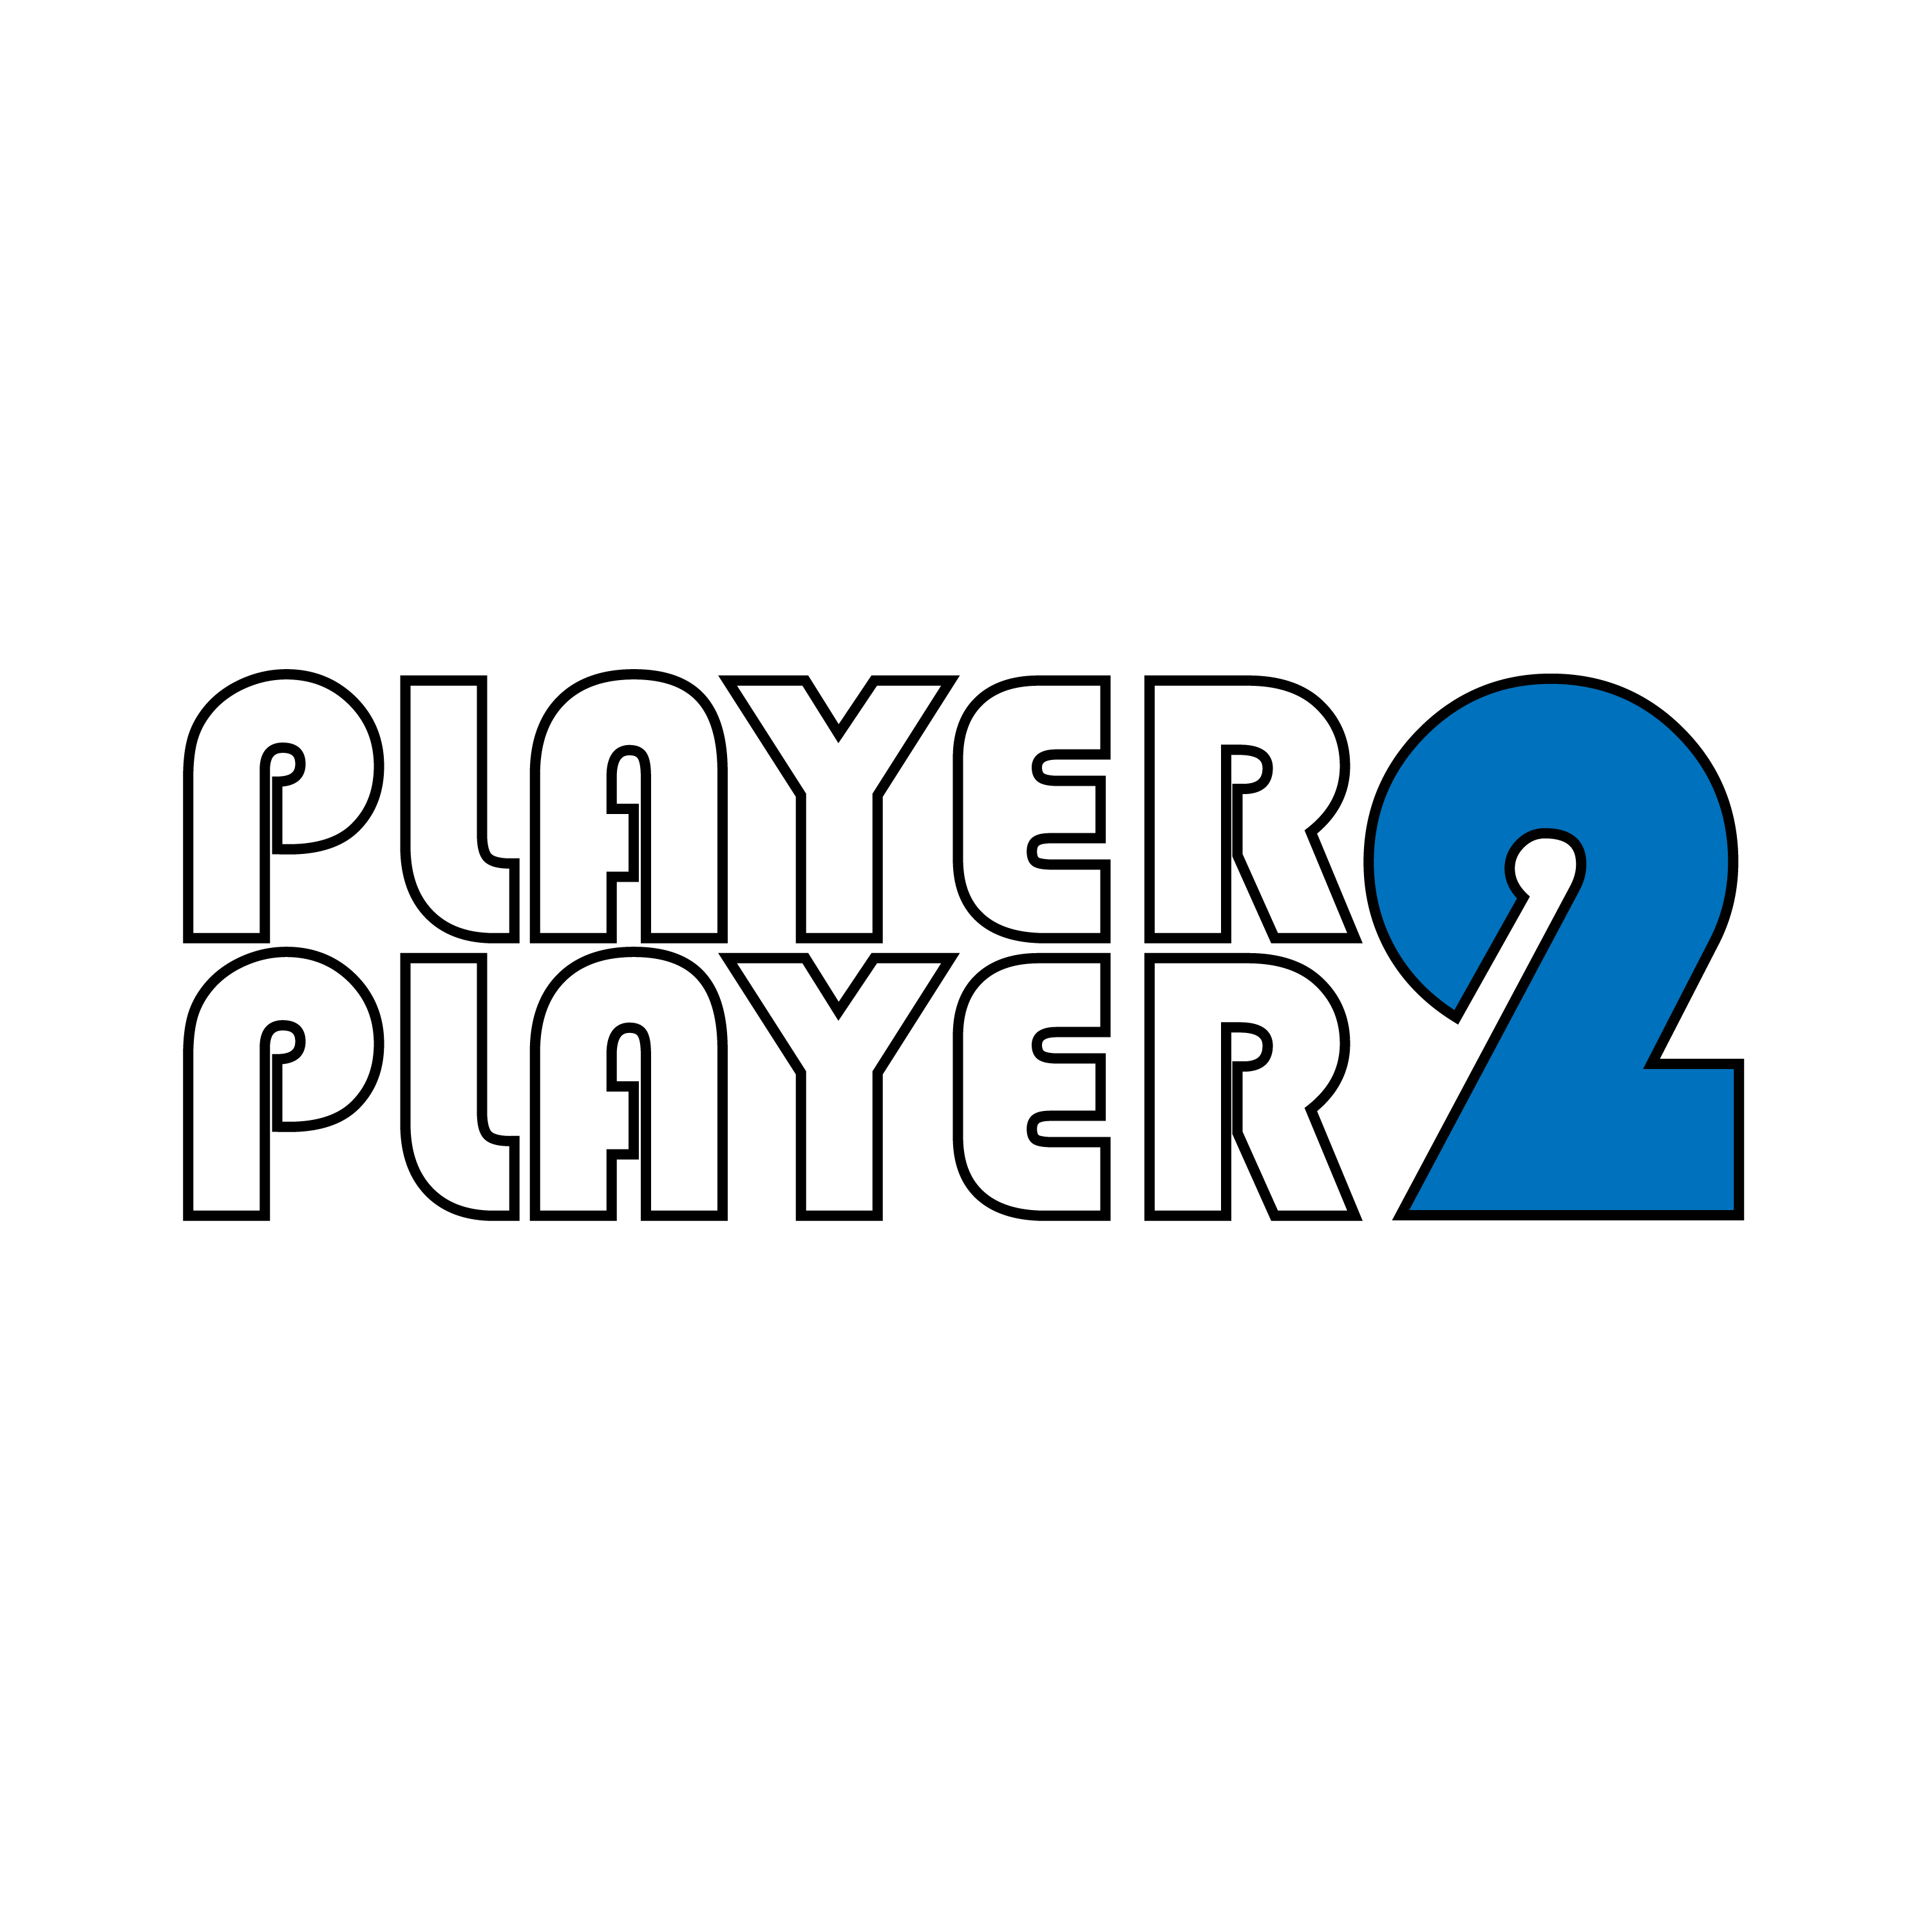 Artwork for podcast Player-2-Player